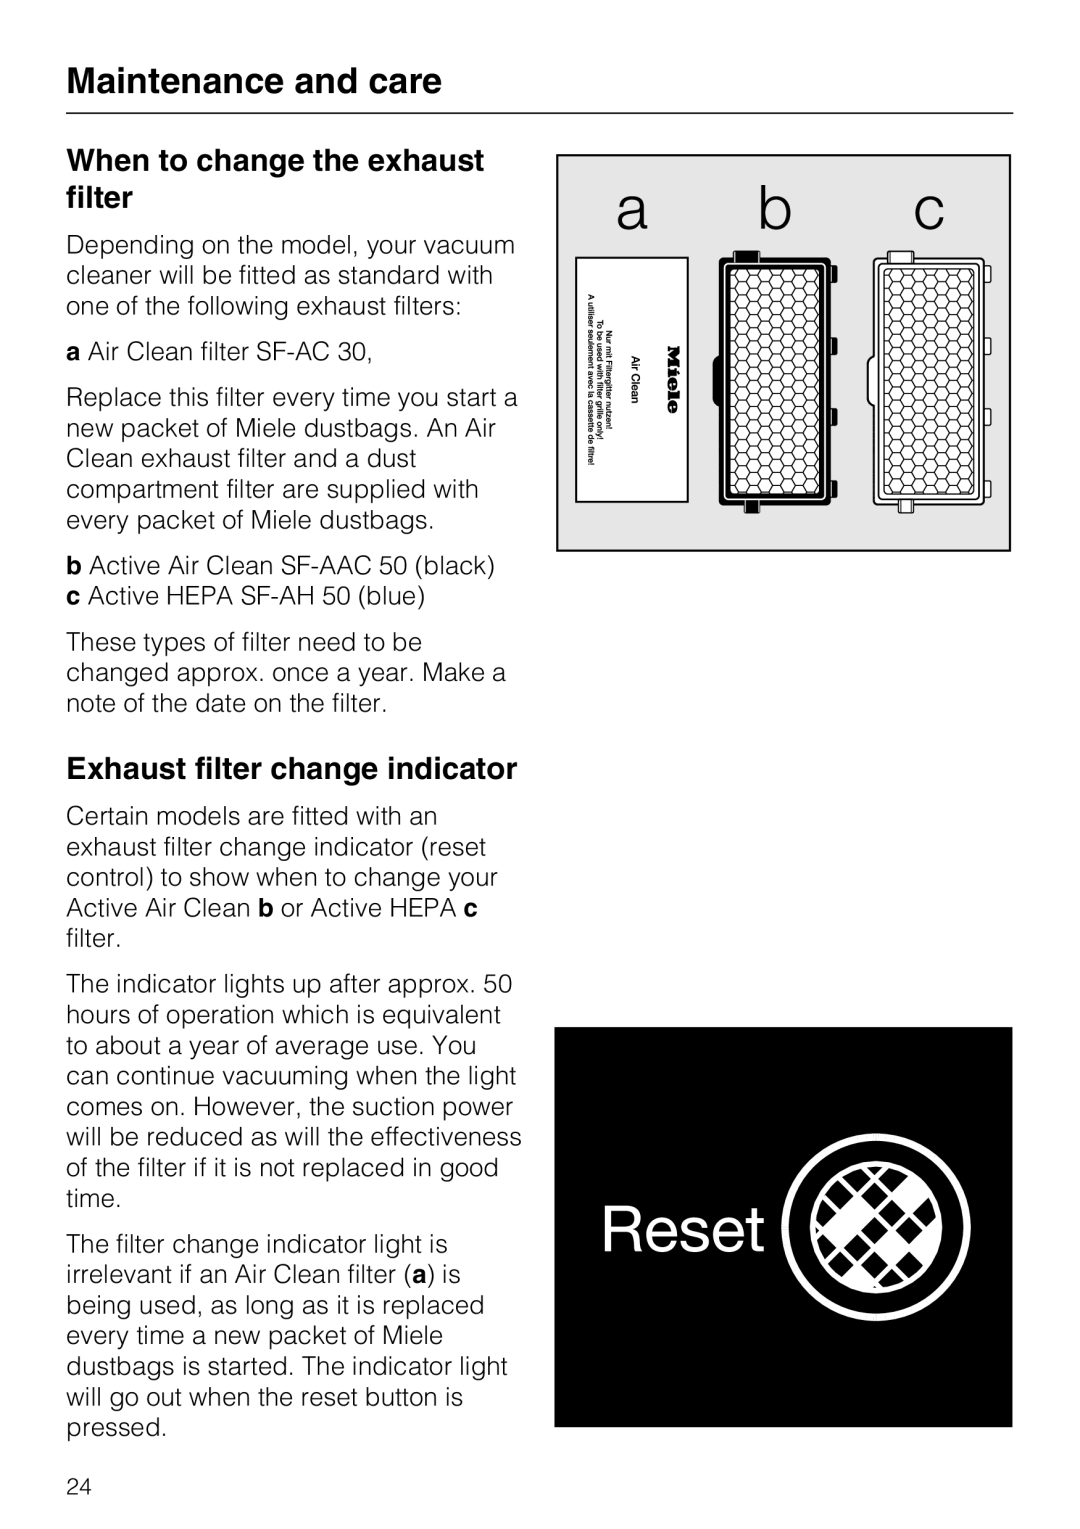 Miele S4212 manual When to change the exhaust filter, Exhaust filter change indicator, Maintenance and care 